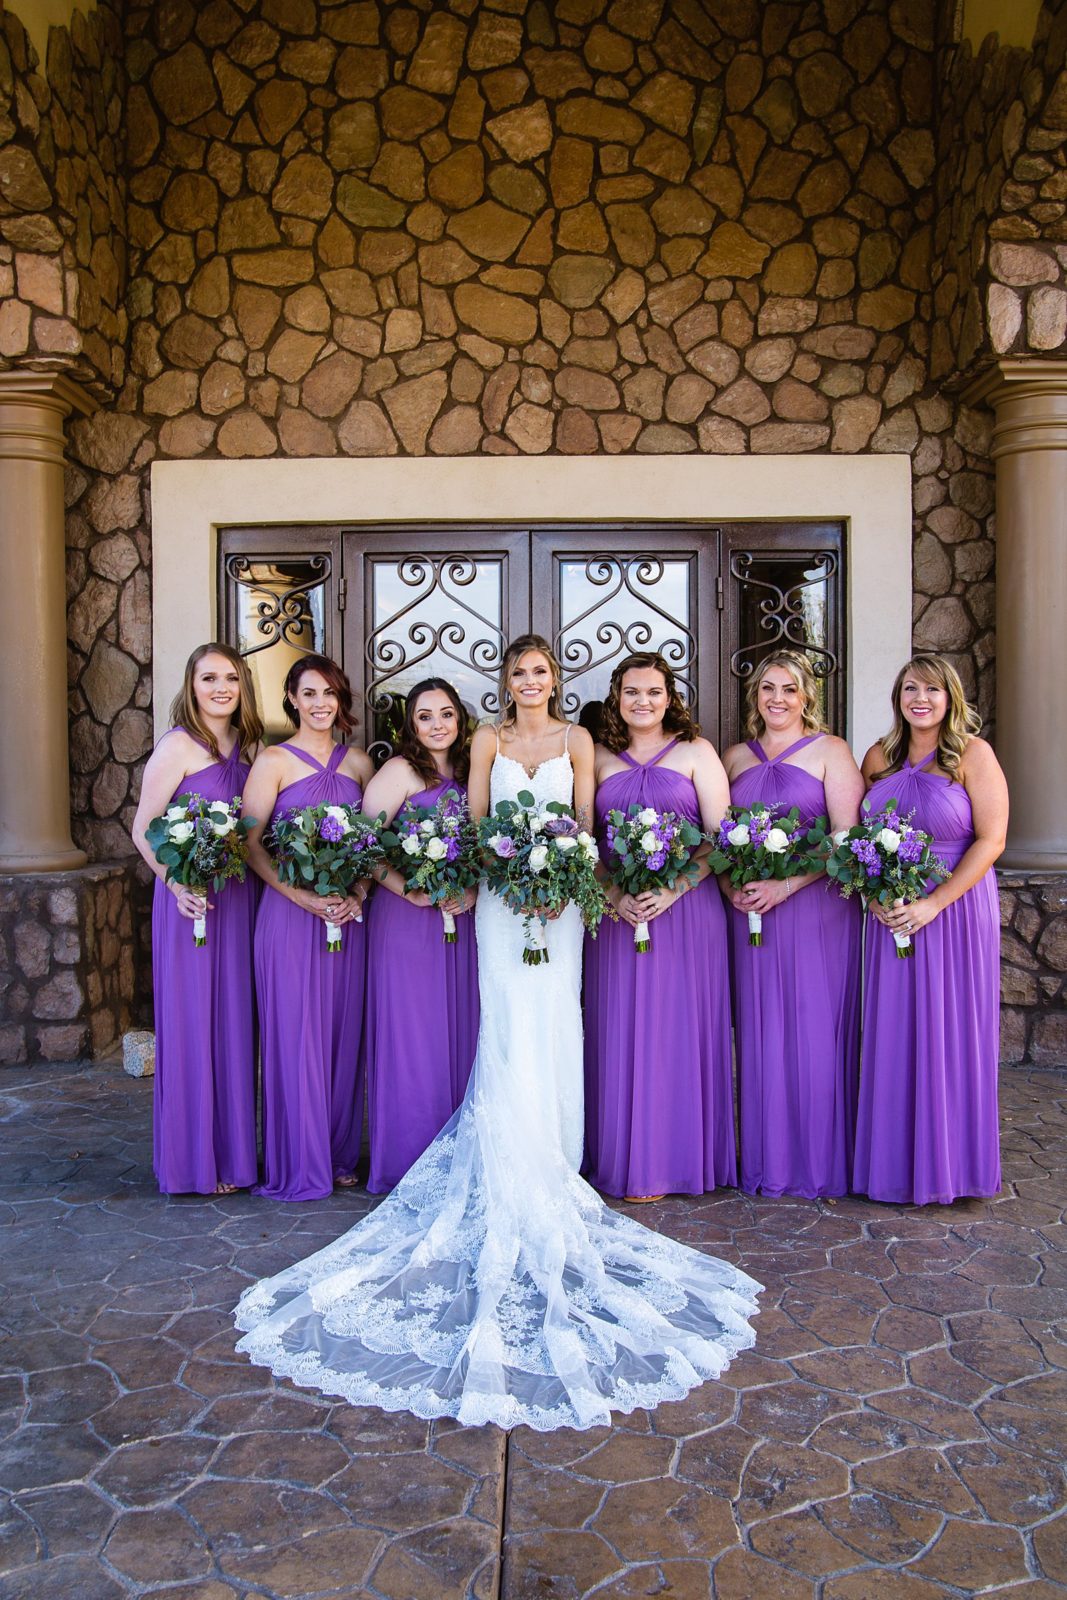 Bride and bridesmaids together at a Superstition Manor wedding by Arizona wedding photographer PMA Photography.